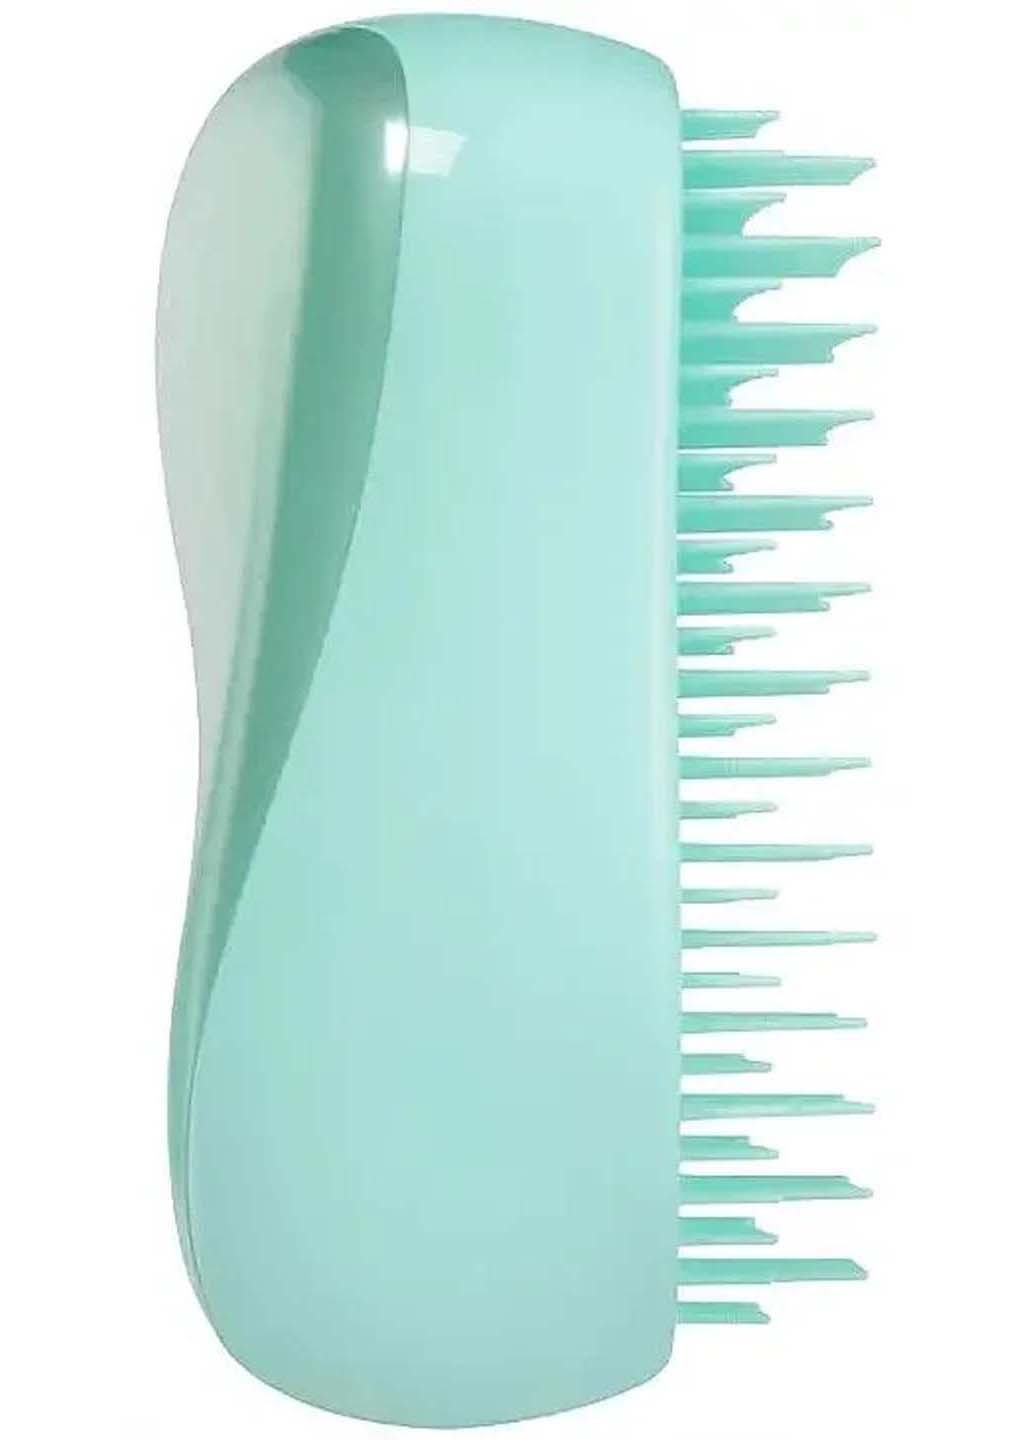 Расческа для волос Compact Styler Frosted Teal Chrome Tangle Teezer (275333568)